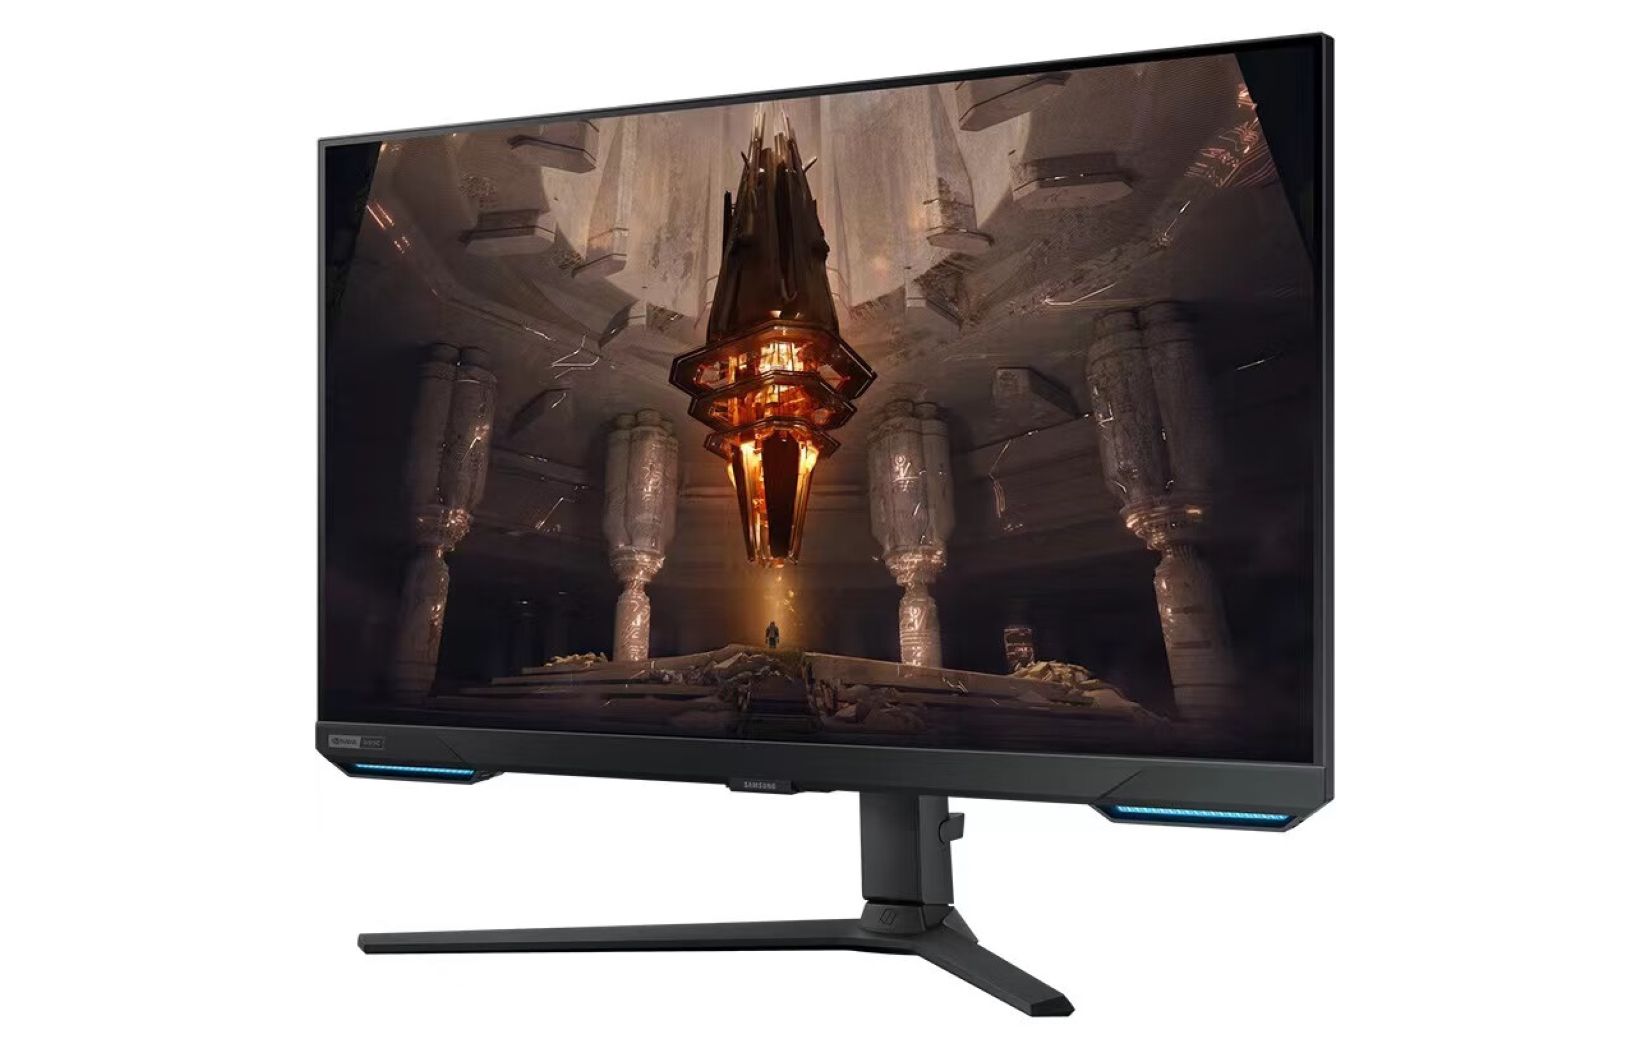 Samsung Dragon Knight G7 - 32" smart 4K gaming monitor with 144Hz frame rate, FreeSync Premium Pro, G-Sync and Tizen OS for $715